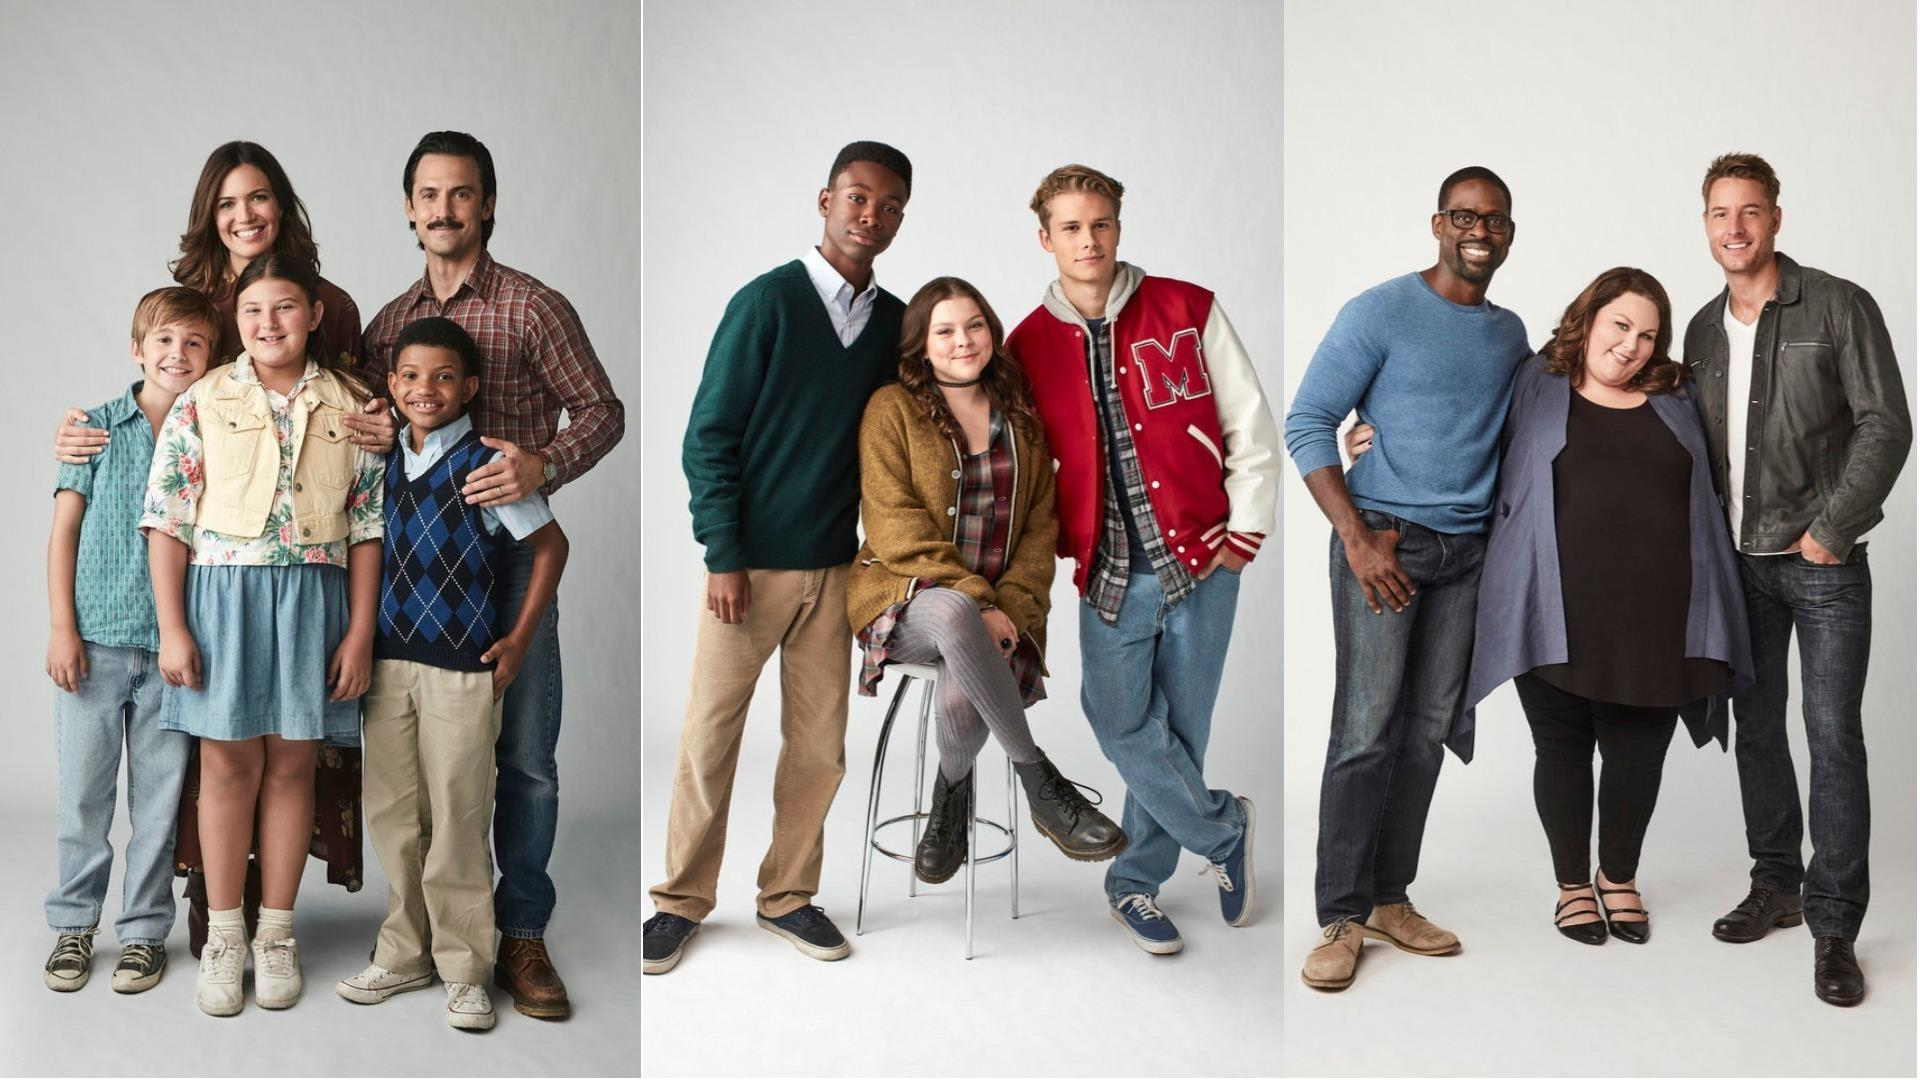 Three photos of This is Us actors side by side. On the left, the two white parents, a white son and daughter, and a black son, in the middle panel, the teenage actors who portray the three child characters, and on the right, the three adult actors who play these characters.